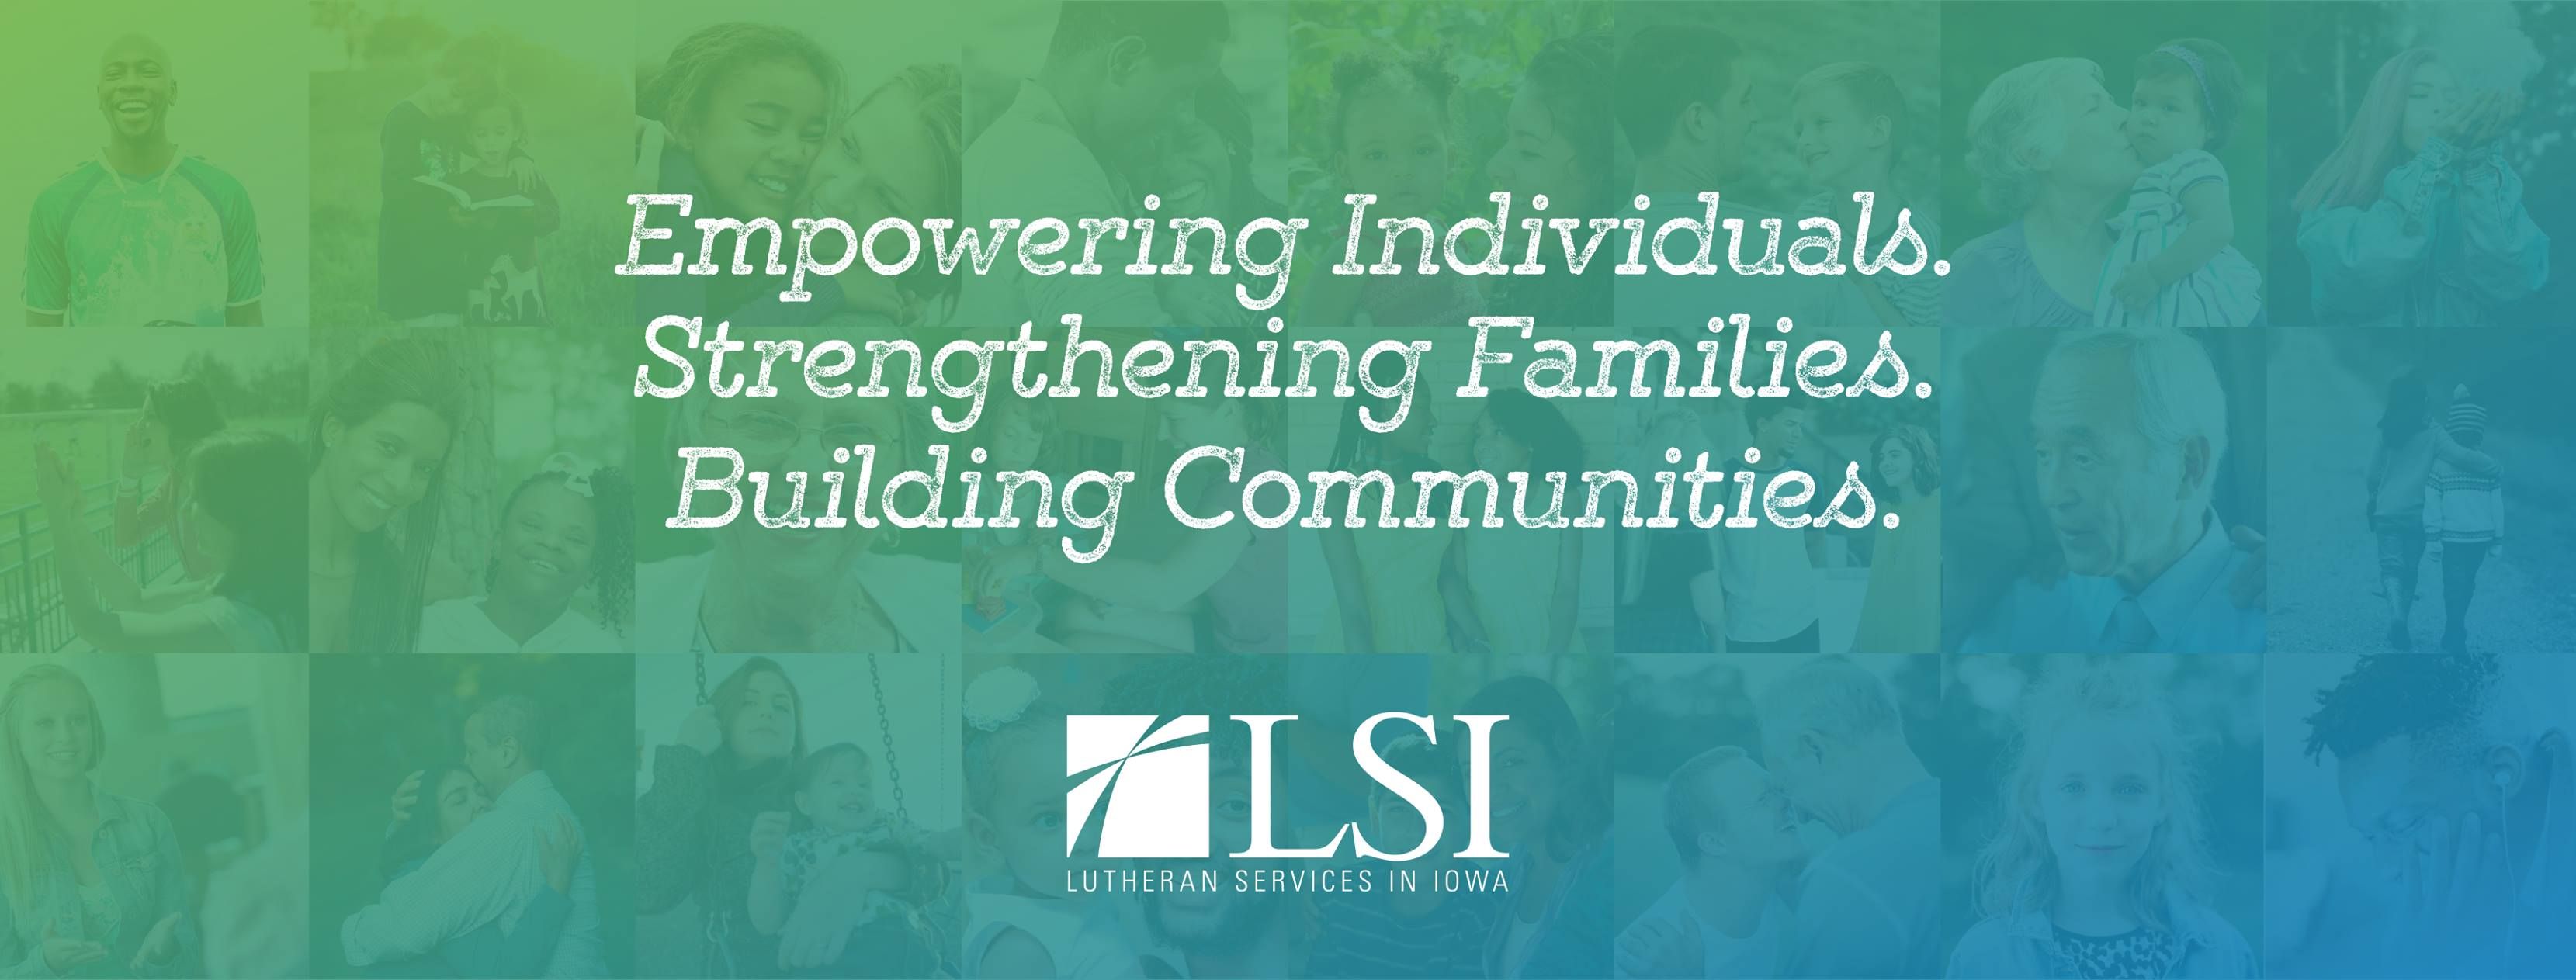 Lutheran Services in Iowa logo. Empowering Individuals, Strengthening Families, Building Communities